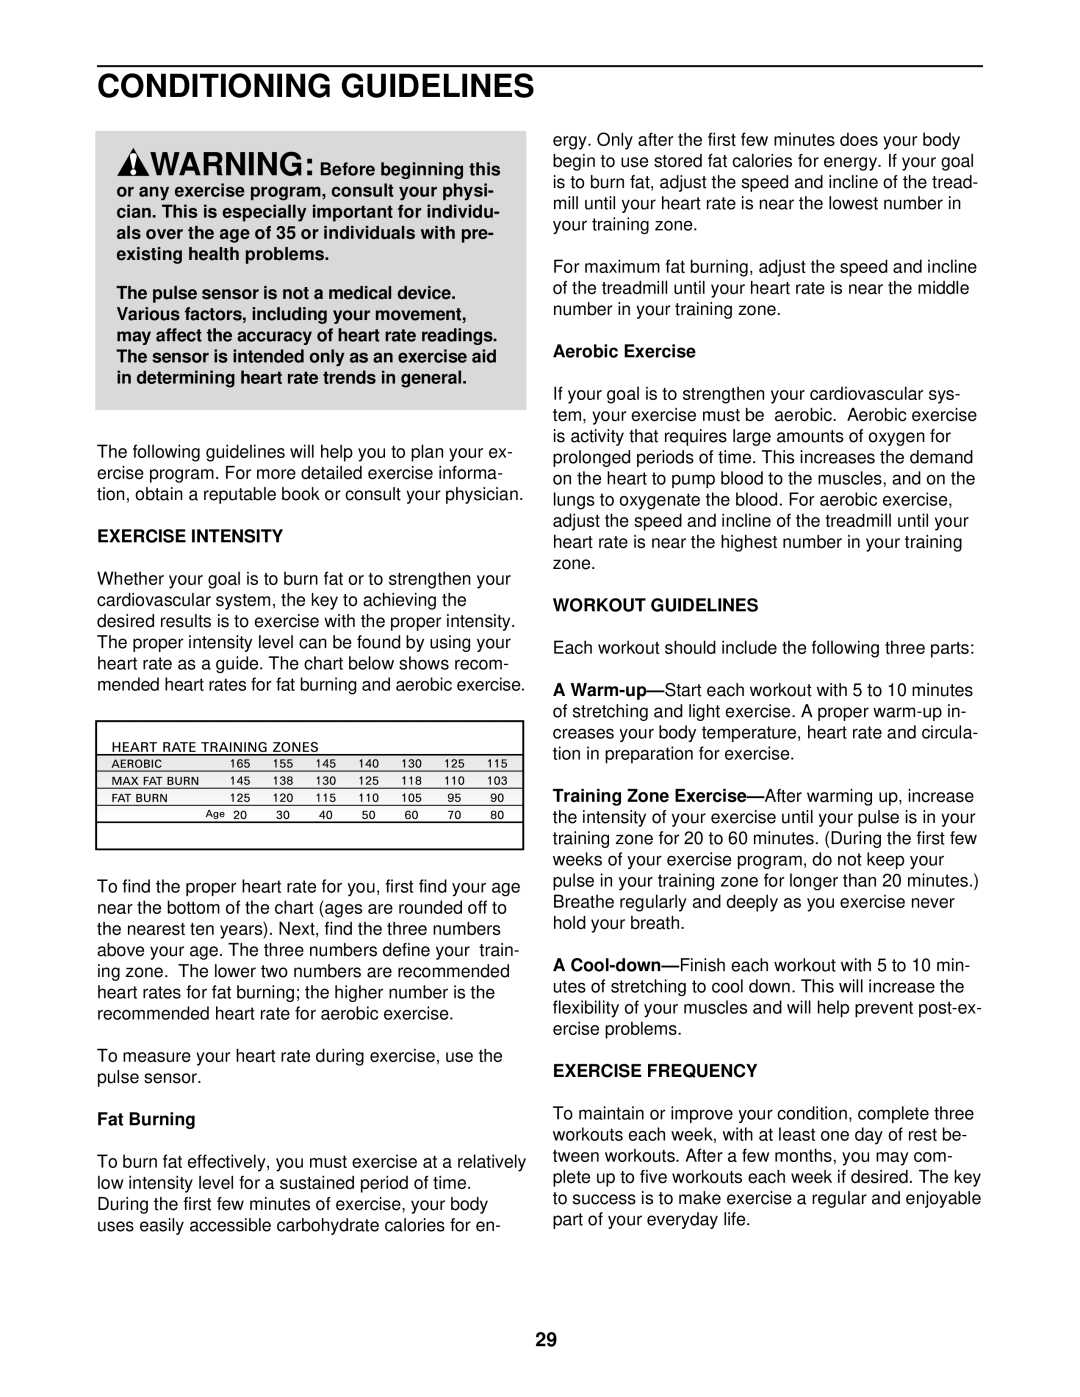 NordicTrack NTL14940 user manual Conditioning Guidelines, Exercise Intensity, Workout Guidelines, Exercise Frequency 